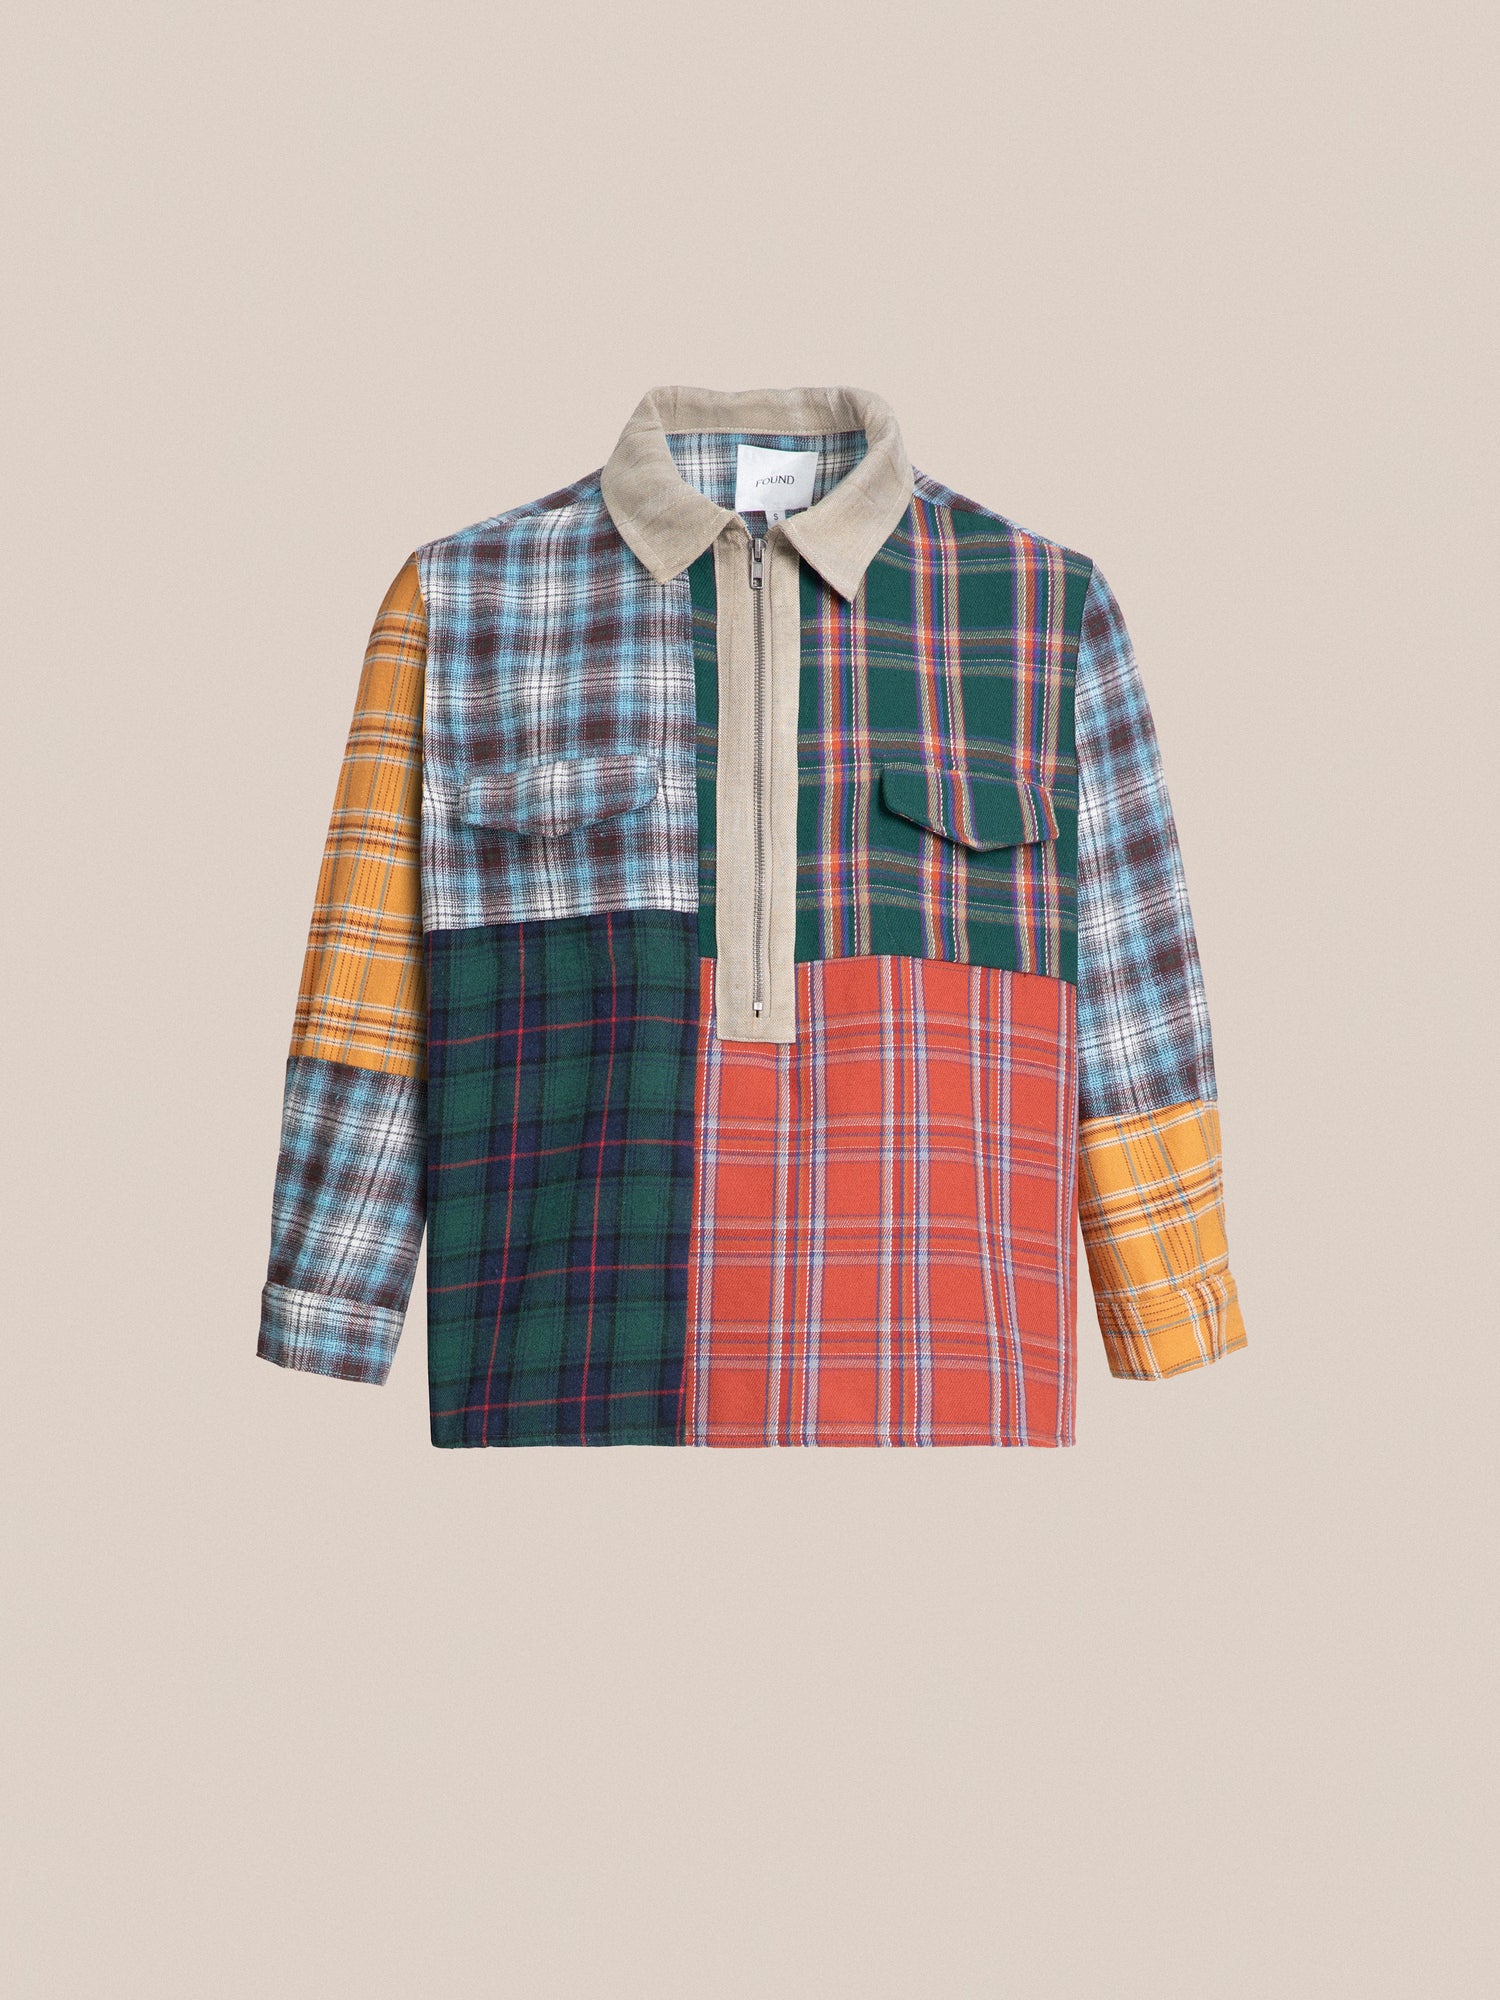 A Multi Plaid Tartan Shirt from Found with a checkered pattern and distressing.